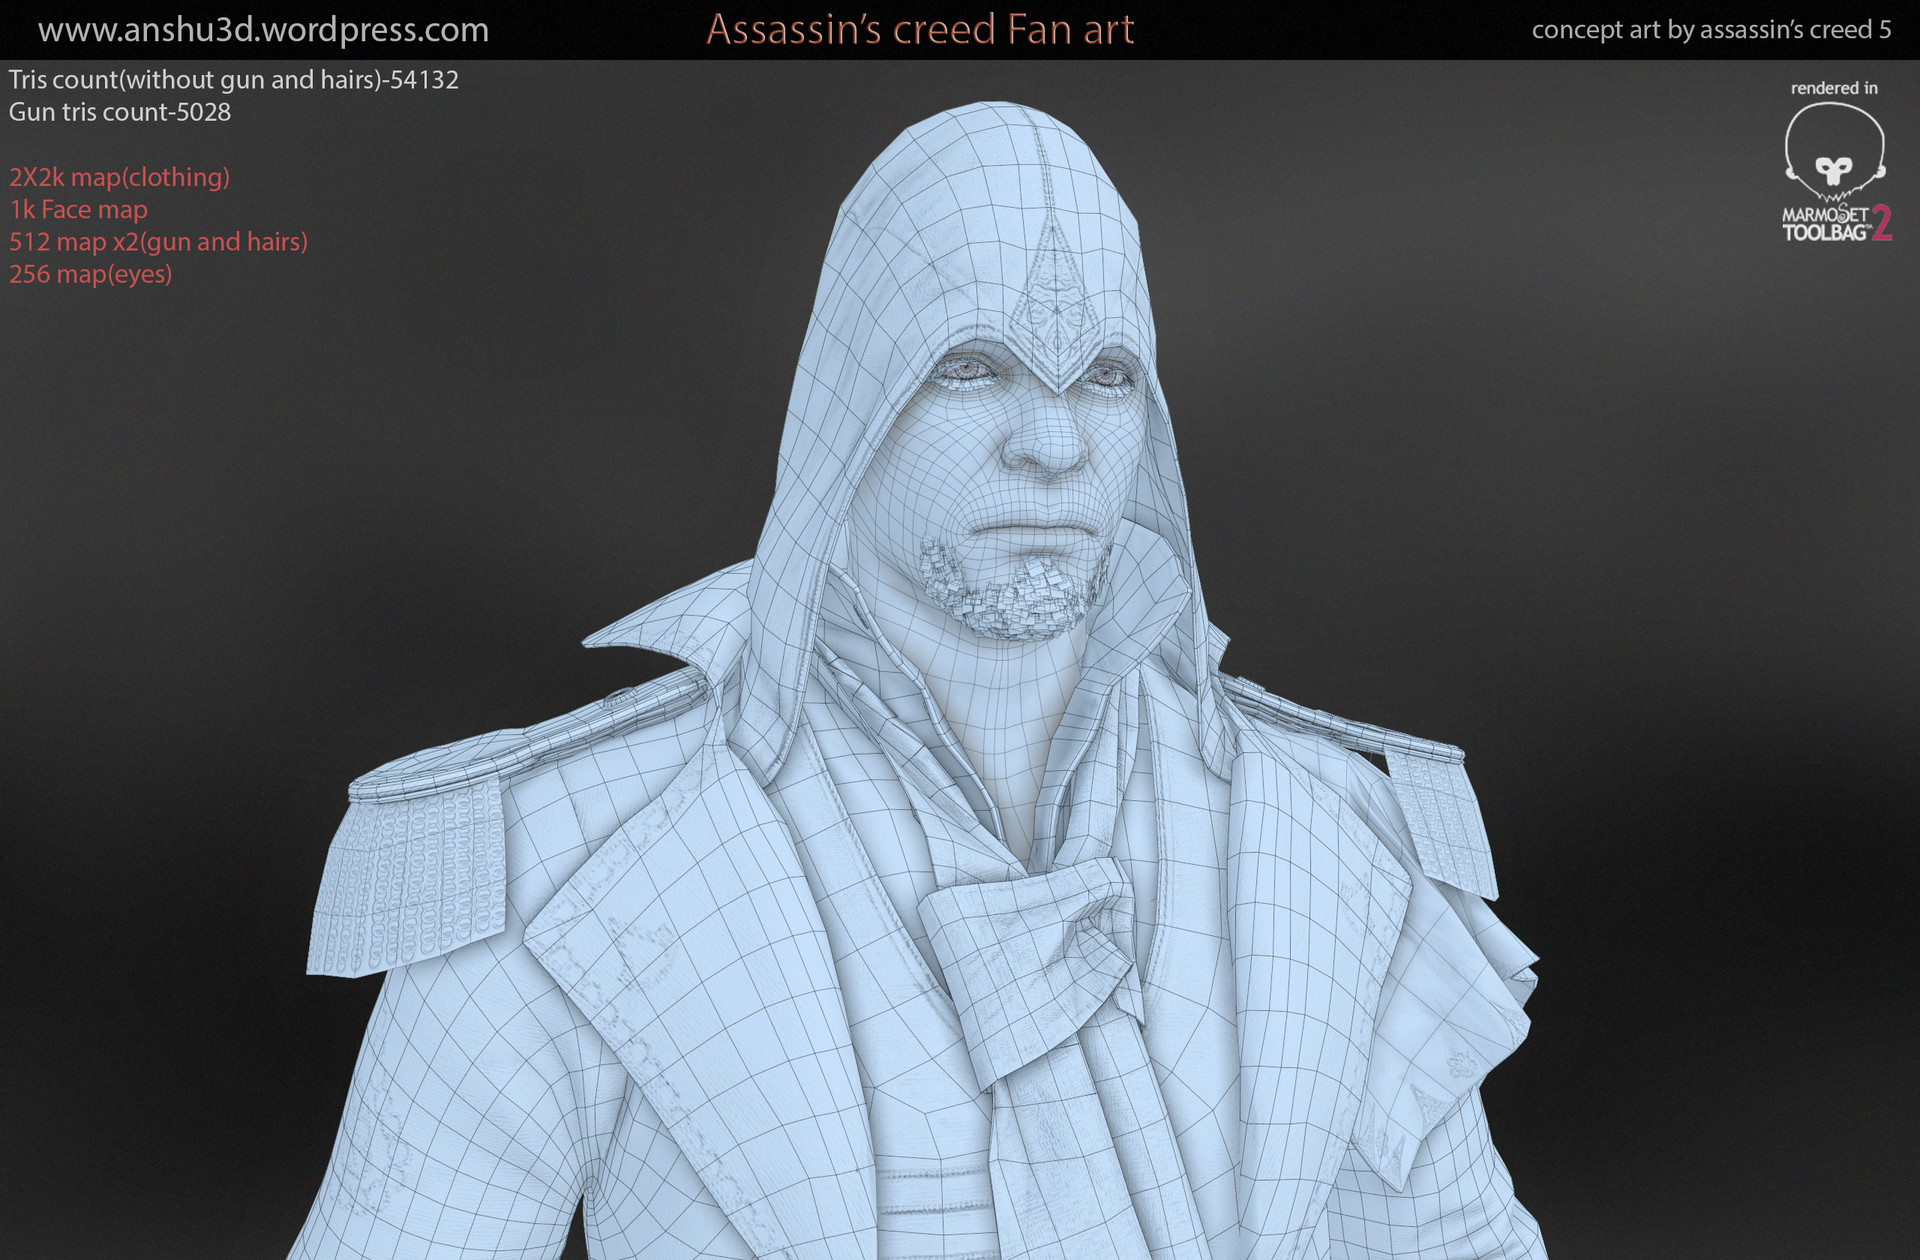 Assassin's Creed III Drawing by Amezy2000 on DeviantArt